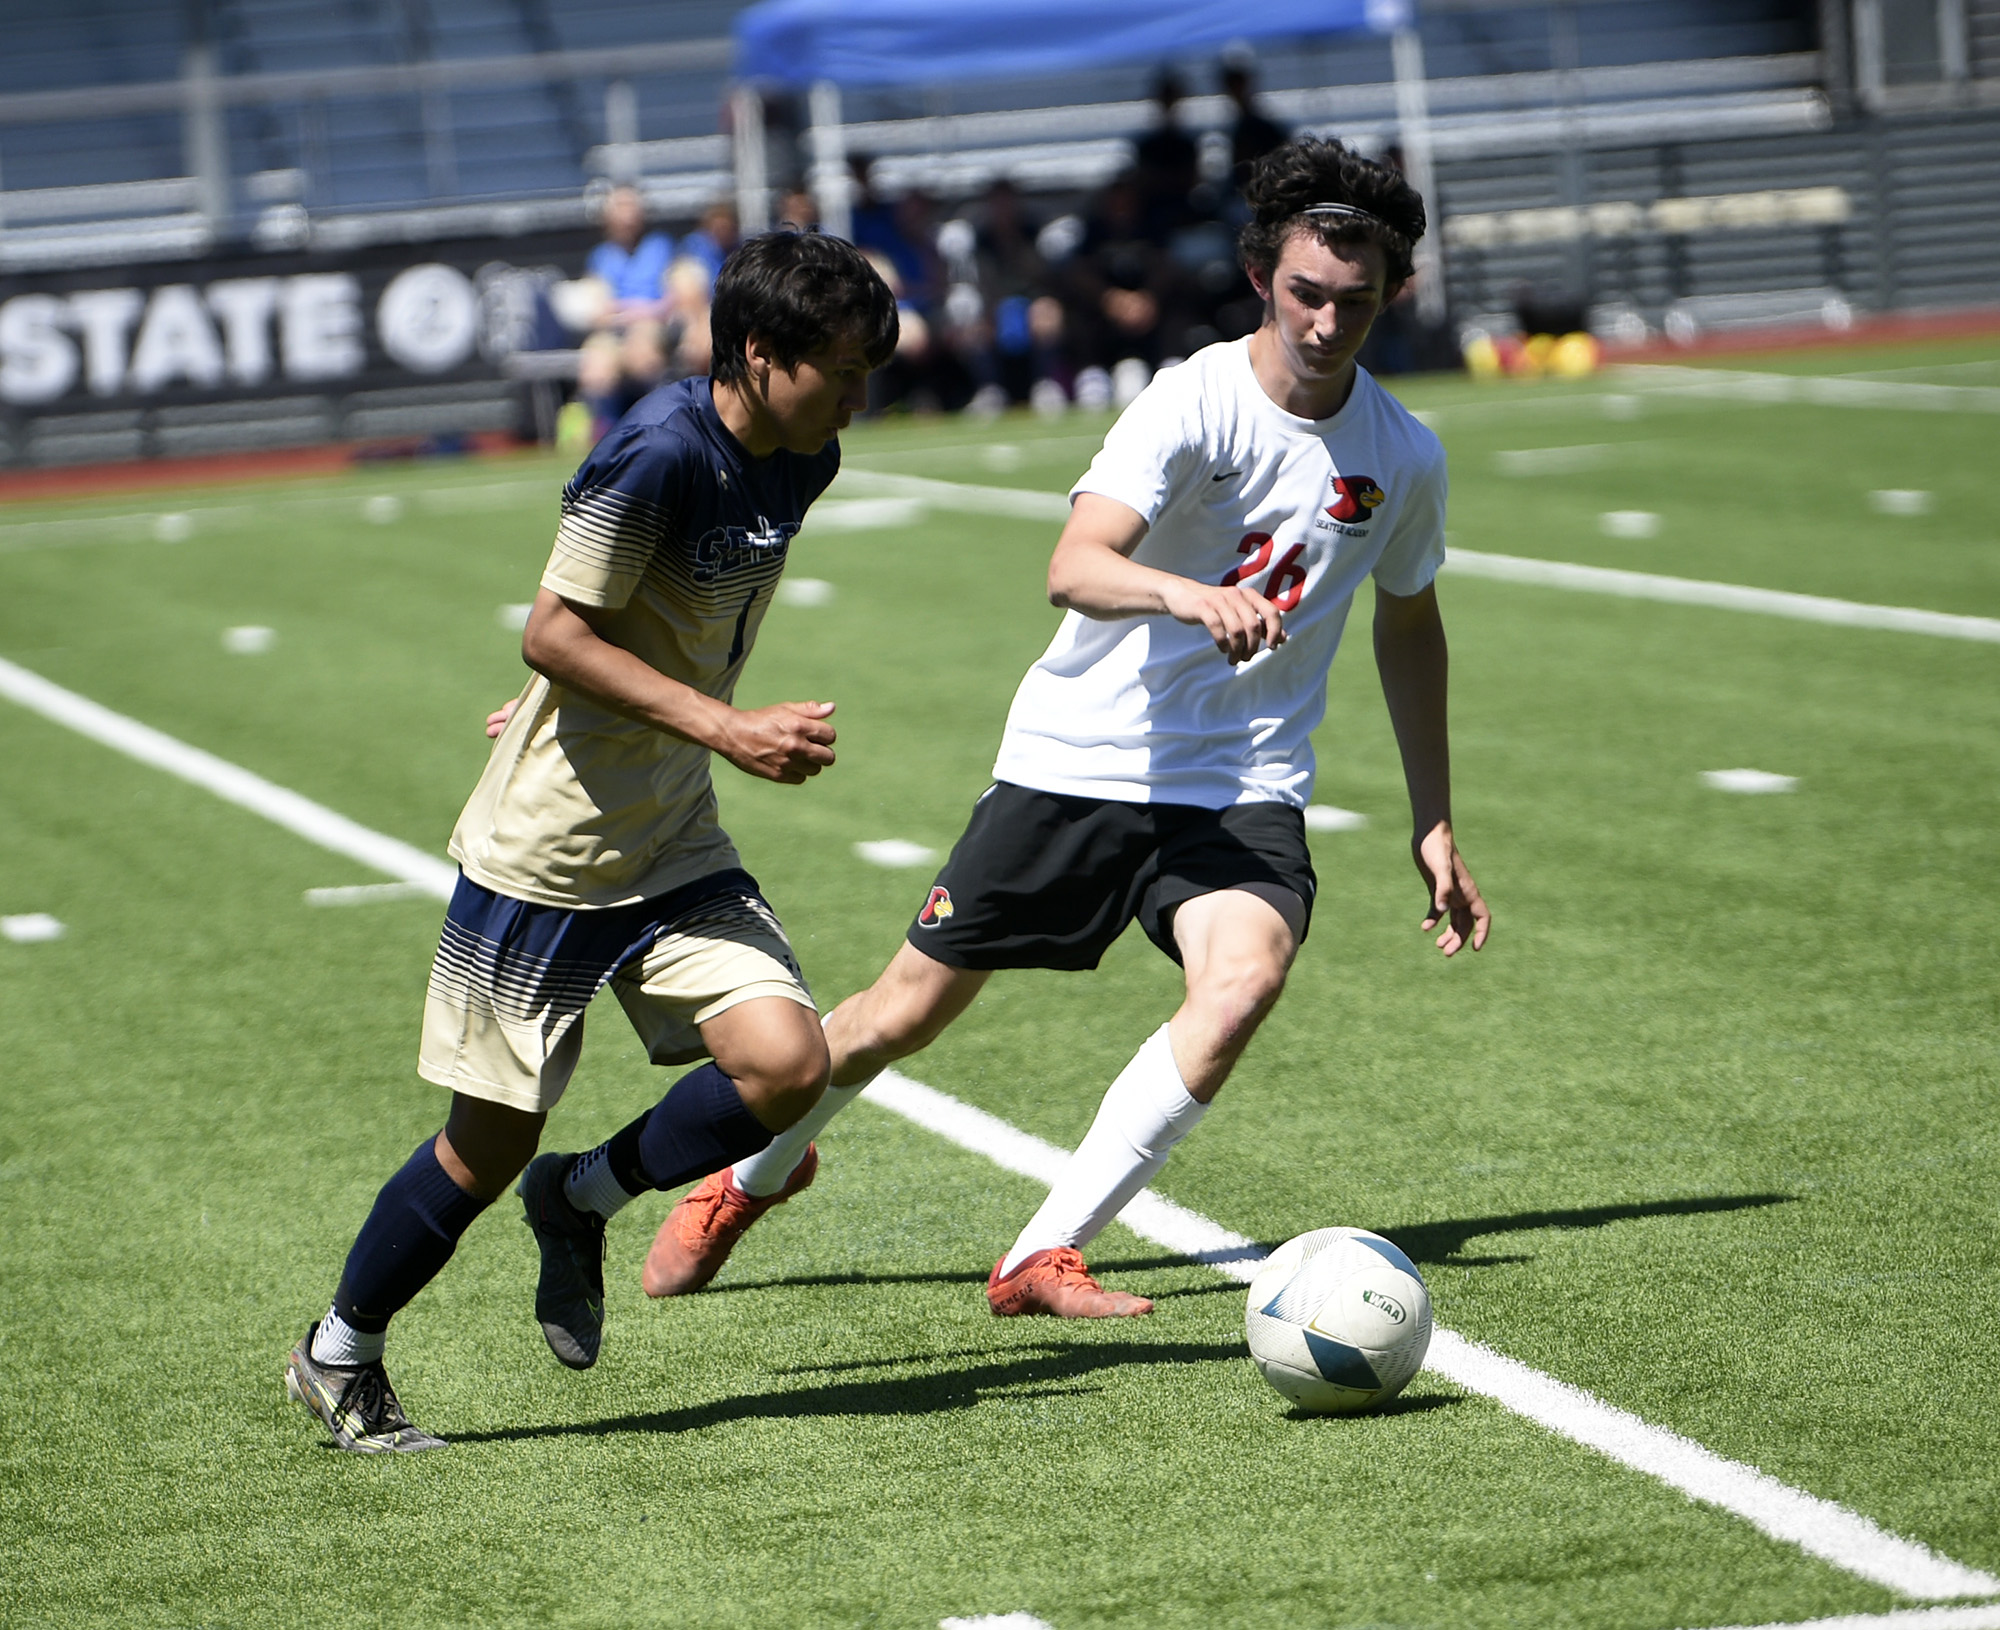 Sam Soto of Seton Catholic (left) dribbles the ball past Seattle Academy's Ben Cady during Seton Catholic's 4-0 loss to Seattle Academy in the 1A boys soccer state semifinal at Renton Memorial Stadium on Friday, May 26, 2023.